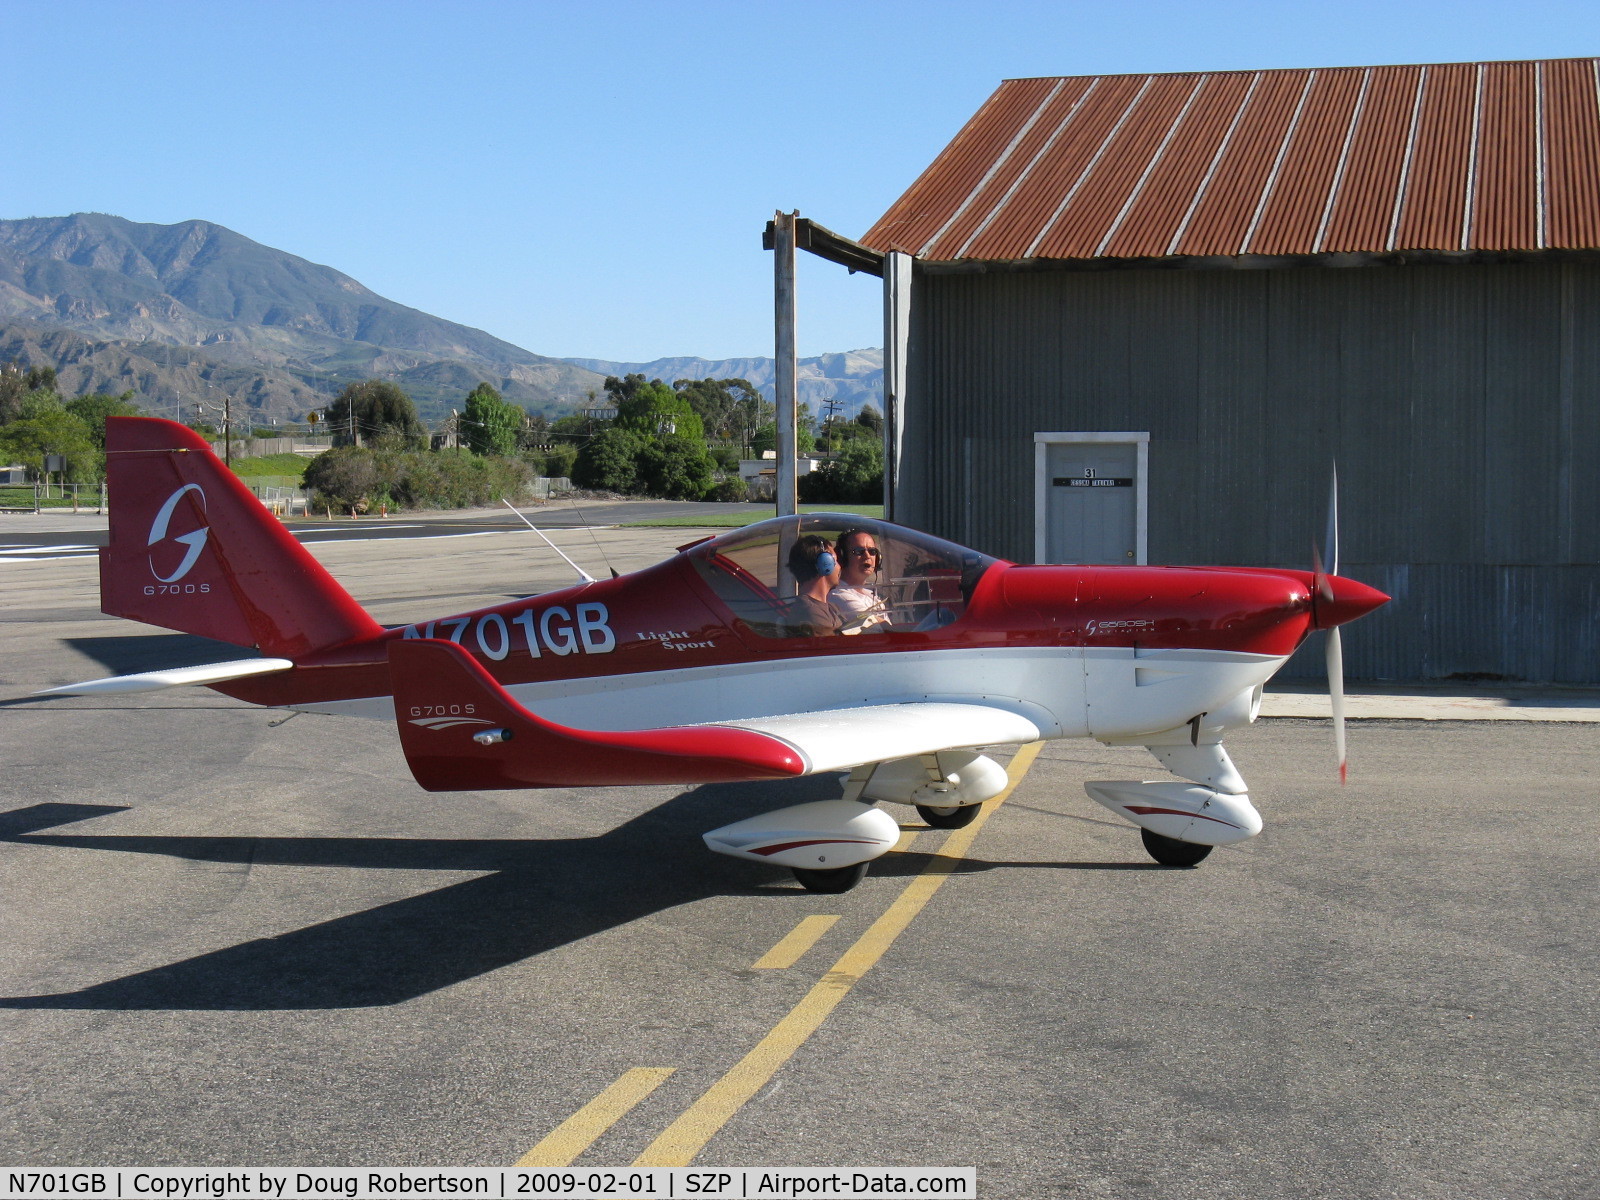 N701GB, 2007 Aero AT-4 LSA C/N AT4-001, 2007 Aero Sp Z O O AT-4 G700S, Rotax 912 ULS 100 Hp, taxi, promoted in USA as GOBOSH (GO Big Or Stay Home)